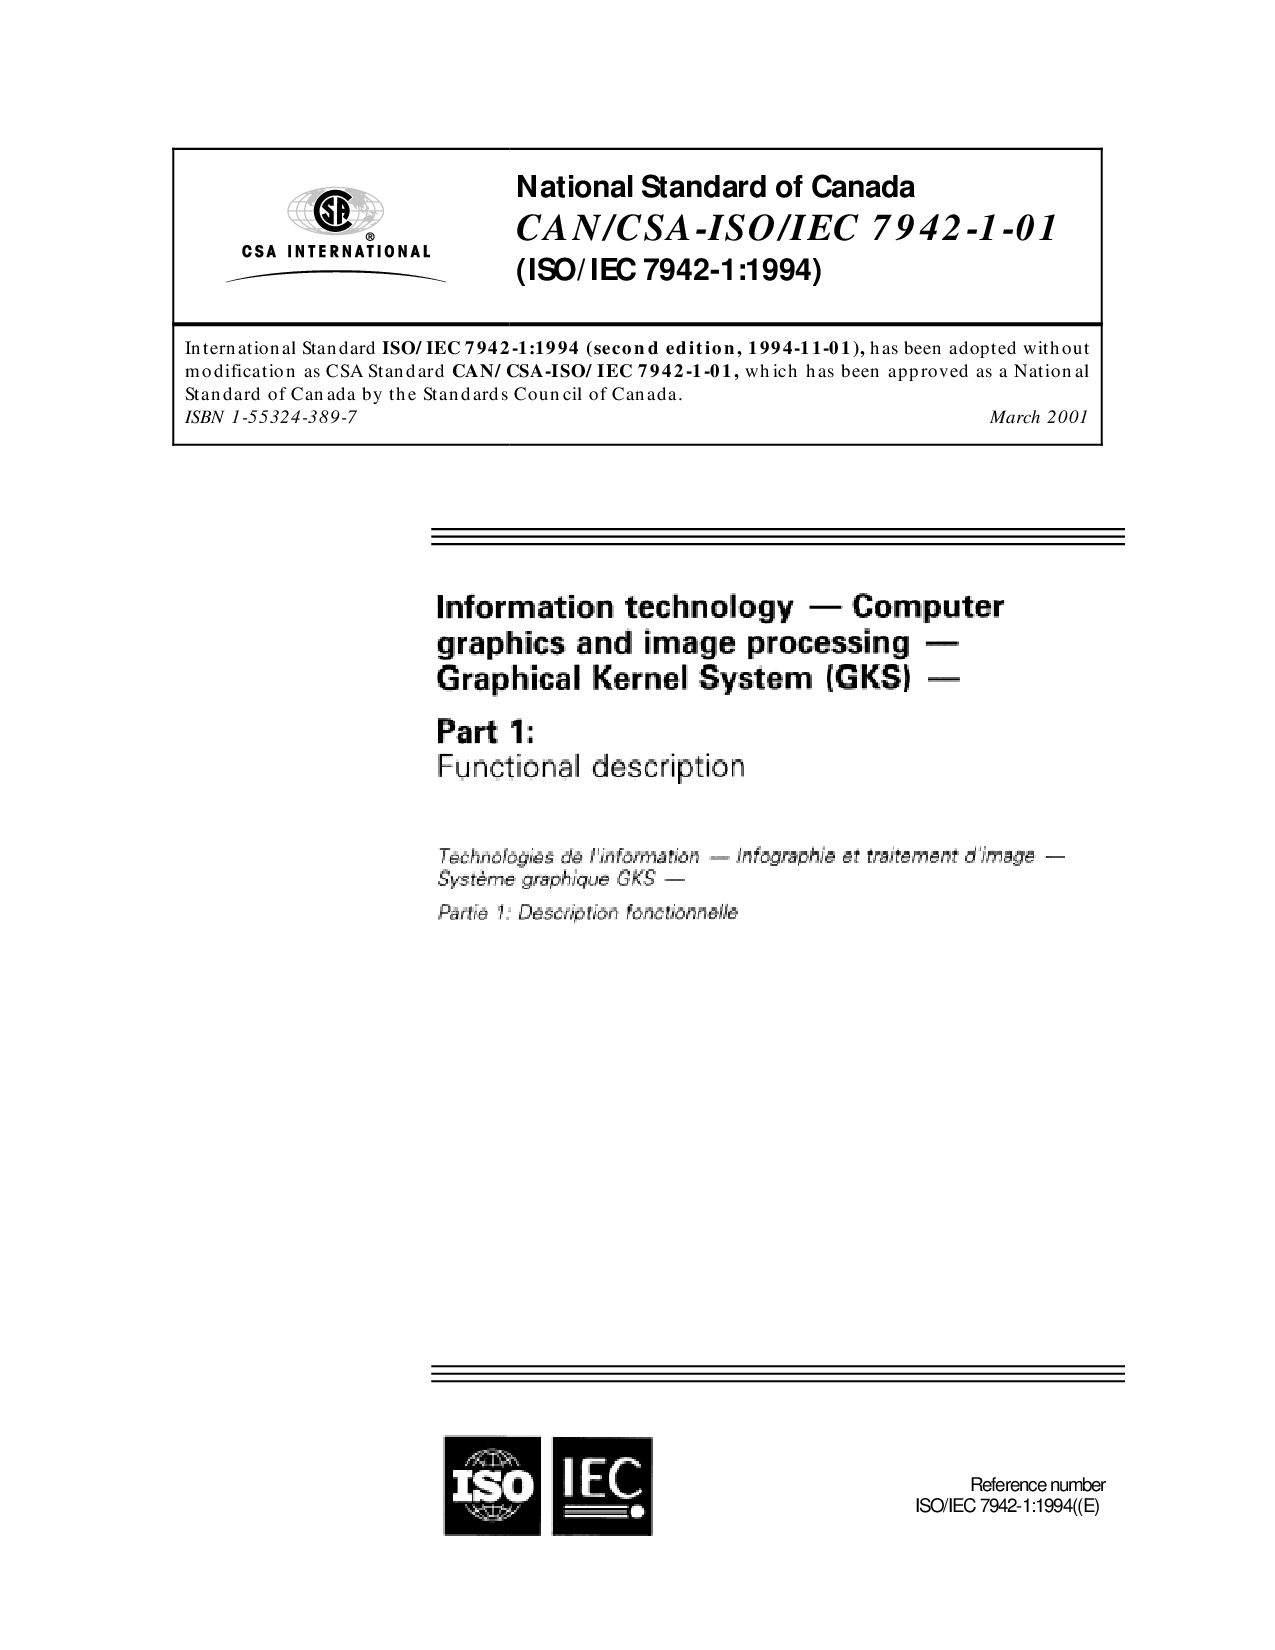 CAN/CSA-ISO/IEC 7942-1:2001